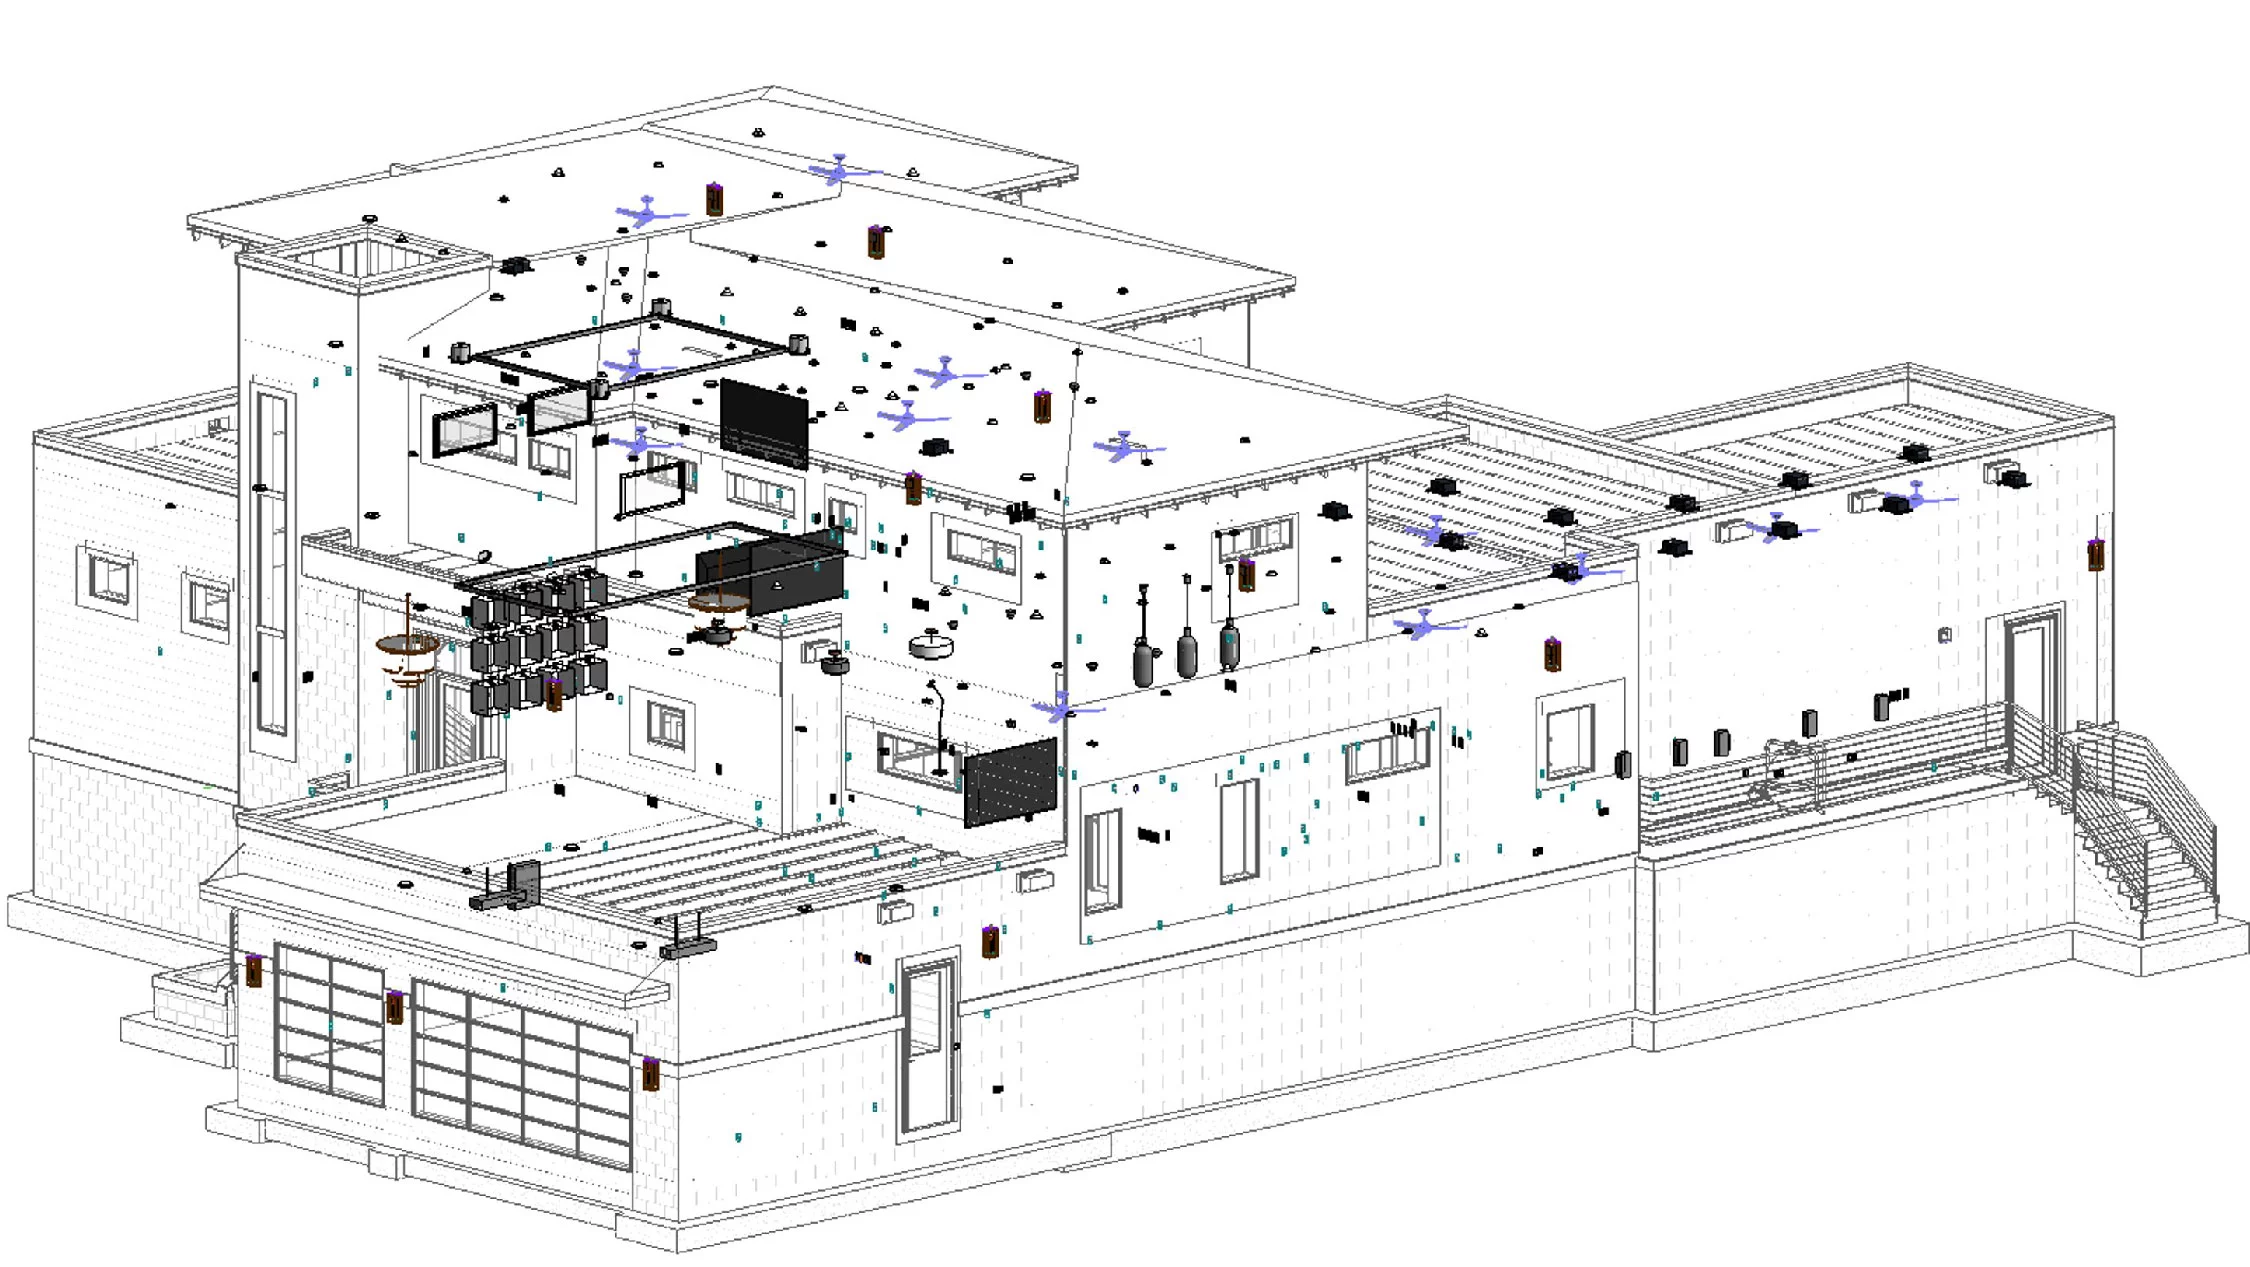 WHAT IS BUILDING INFORMATION MODELING (BIM)?